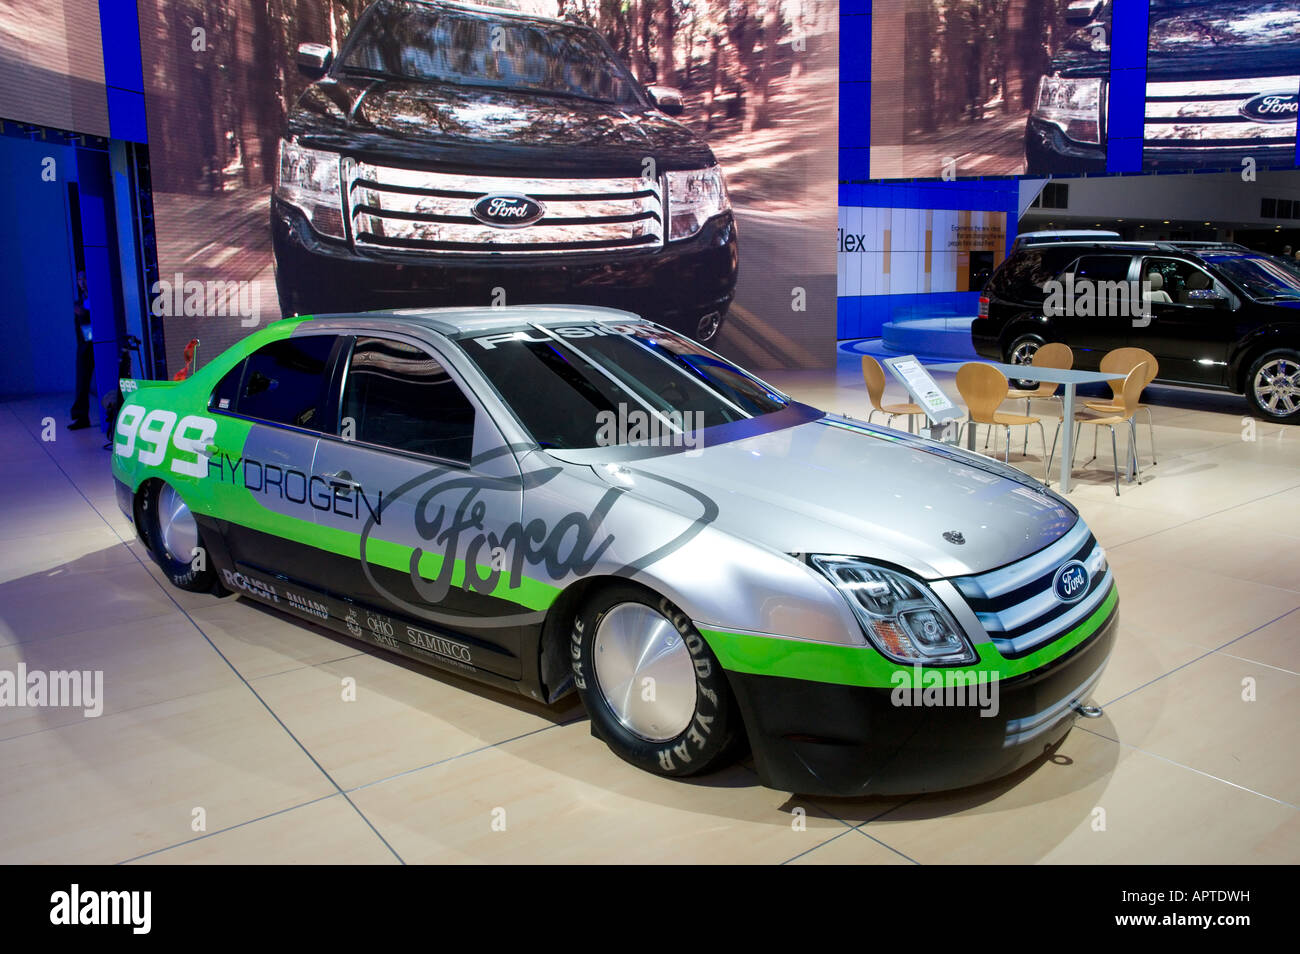 Ford Fusion Hydrogen 999 land speed record car at the 2008 North American International Auto Show in Detroit Michigan USA Stock Photo